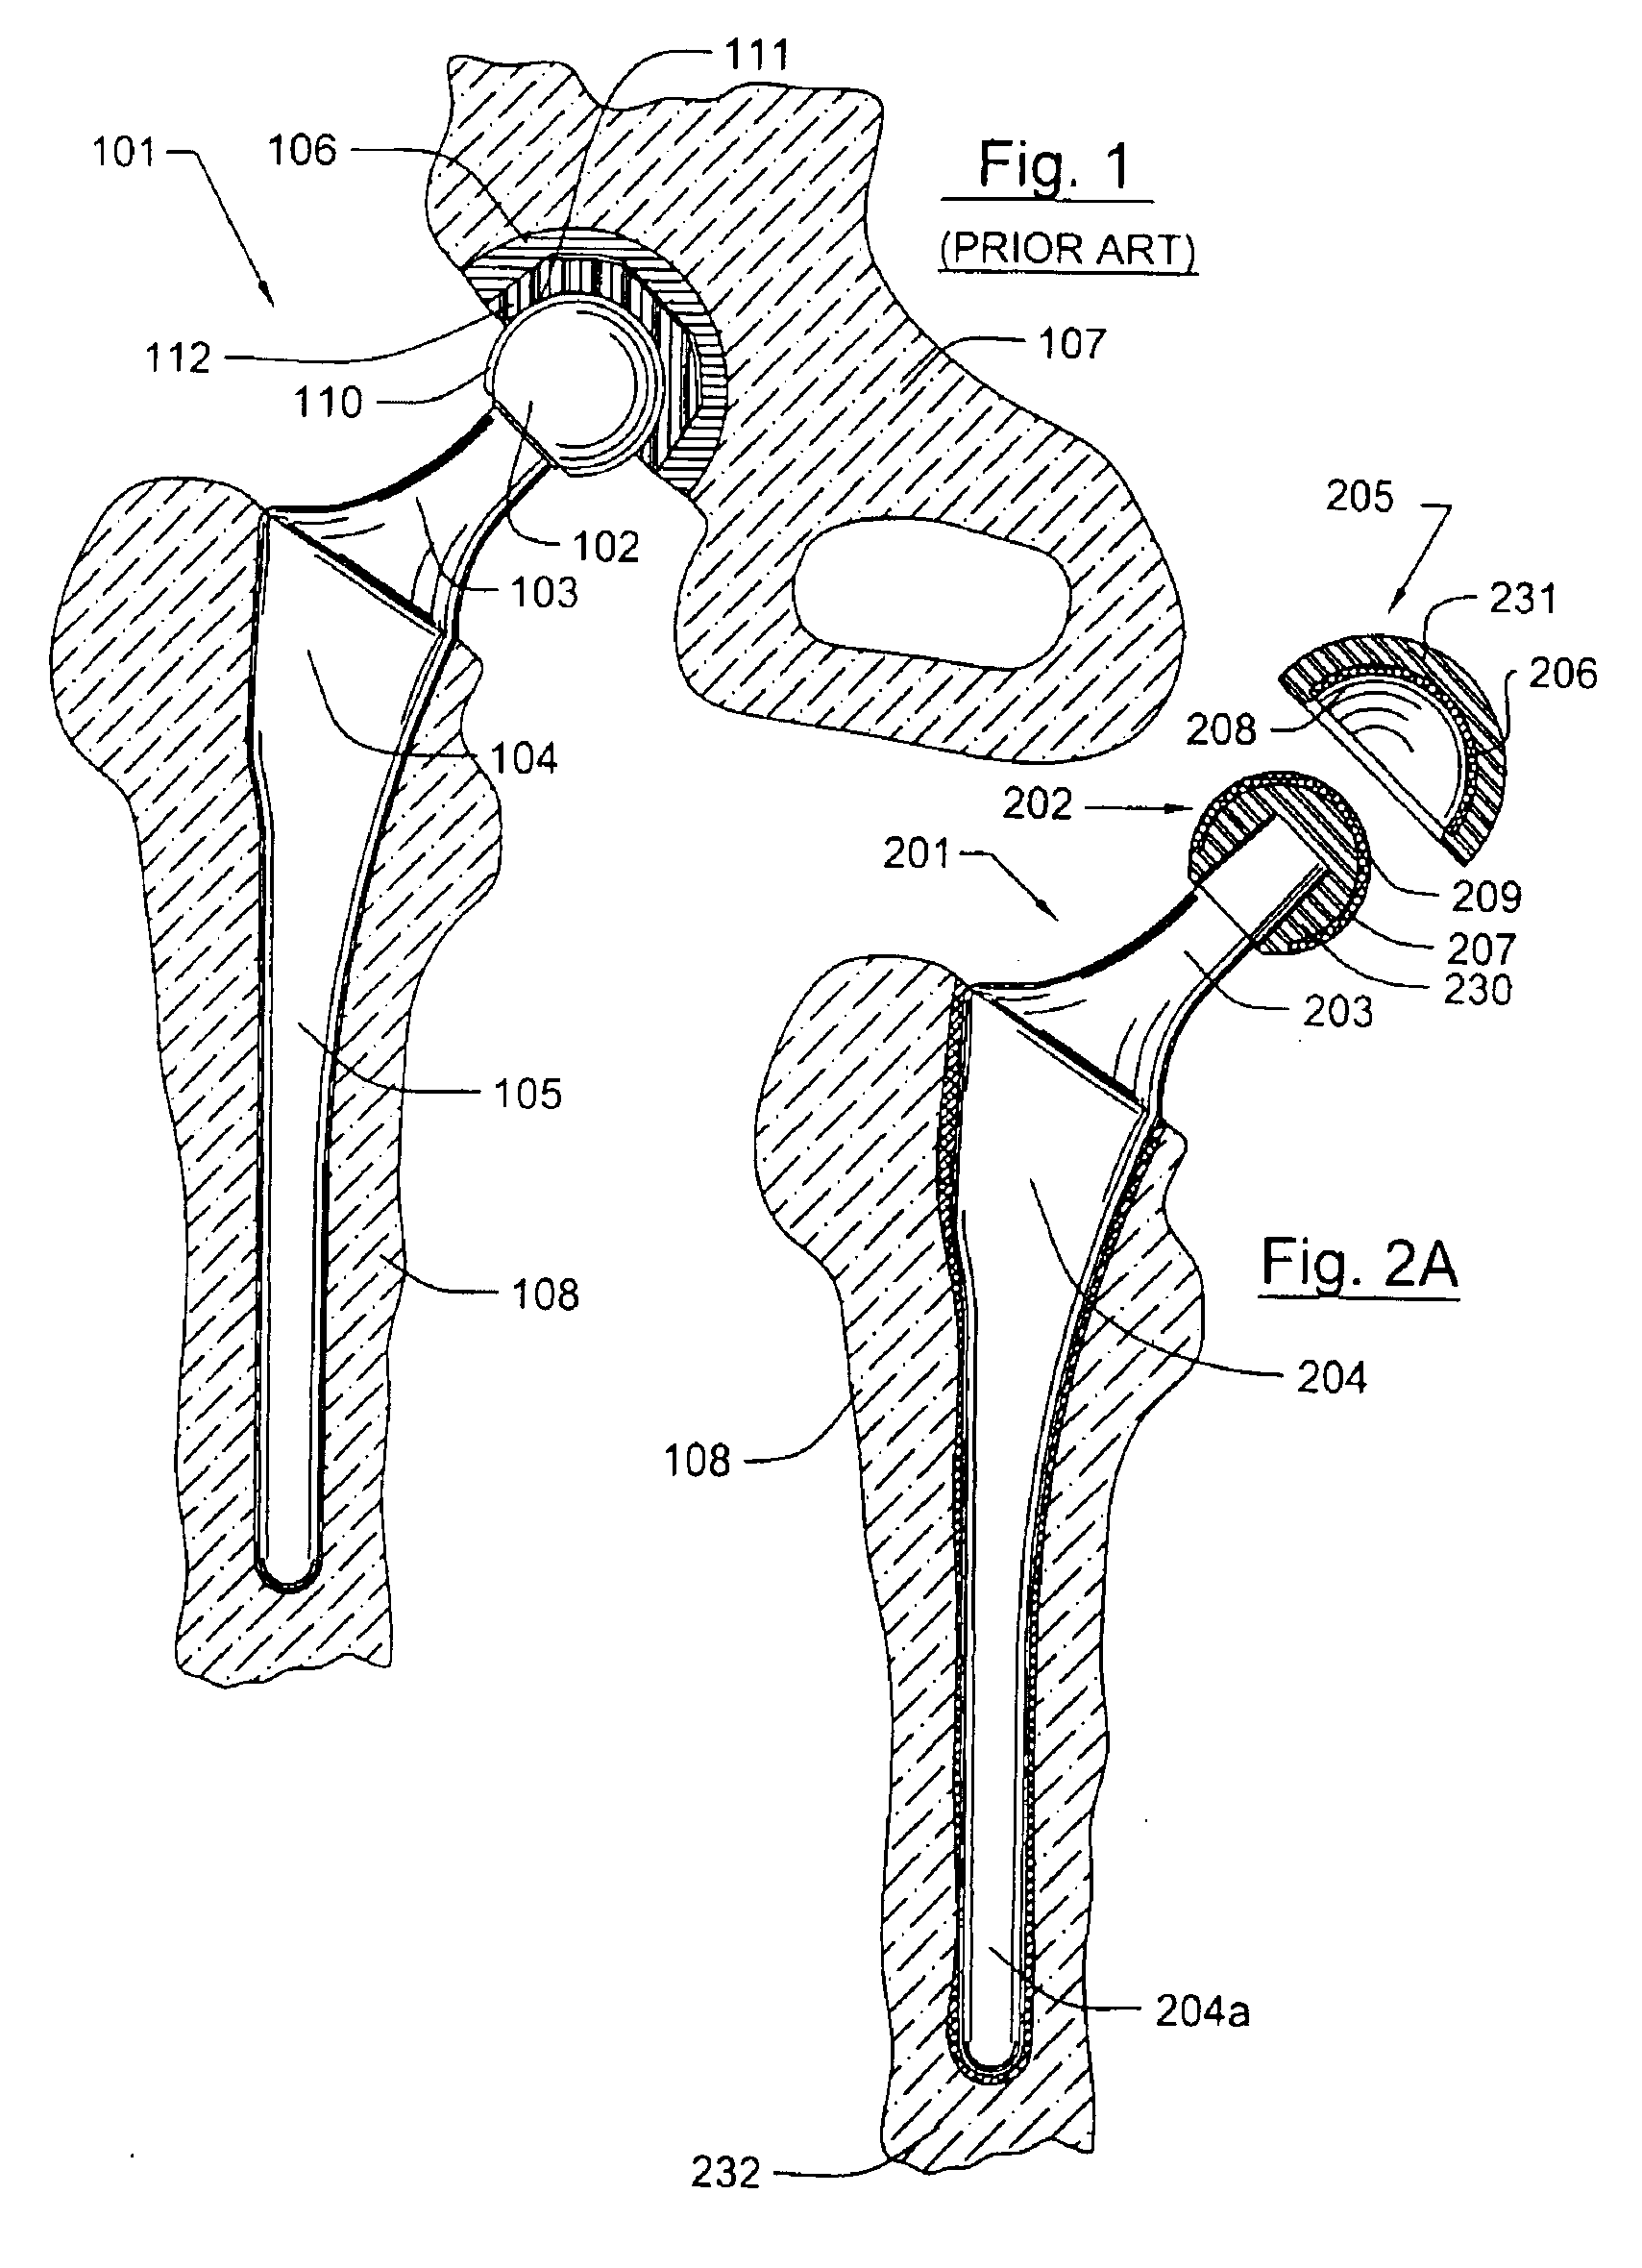 Prosthetic knee joint having at least one diamond articulation surface